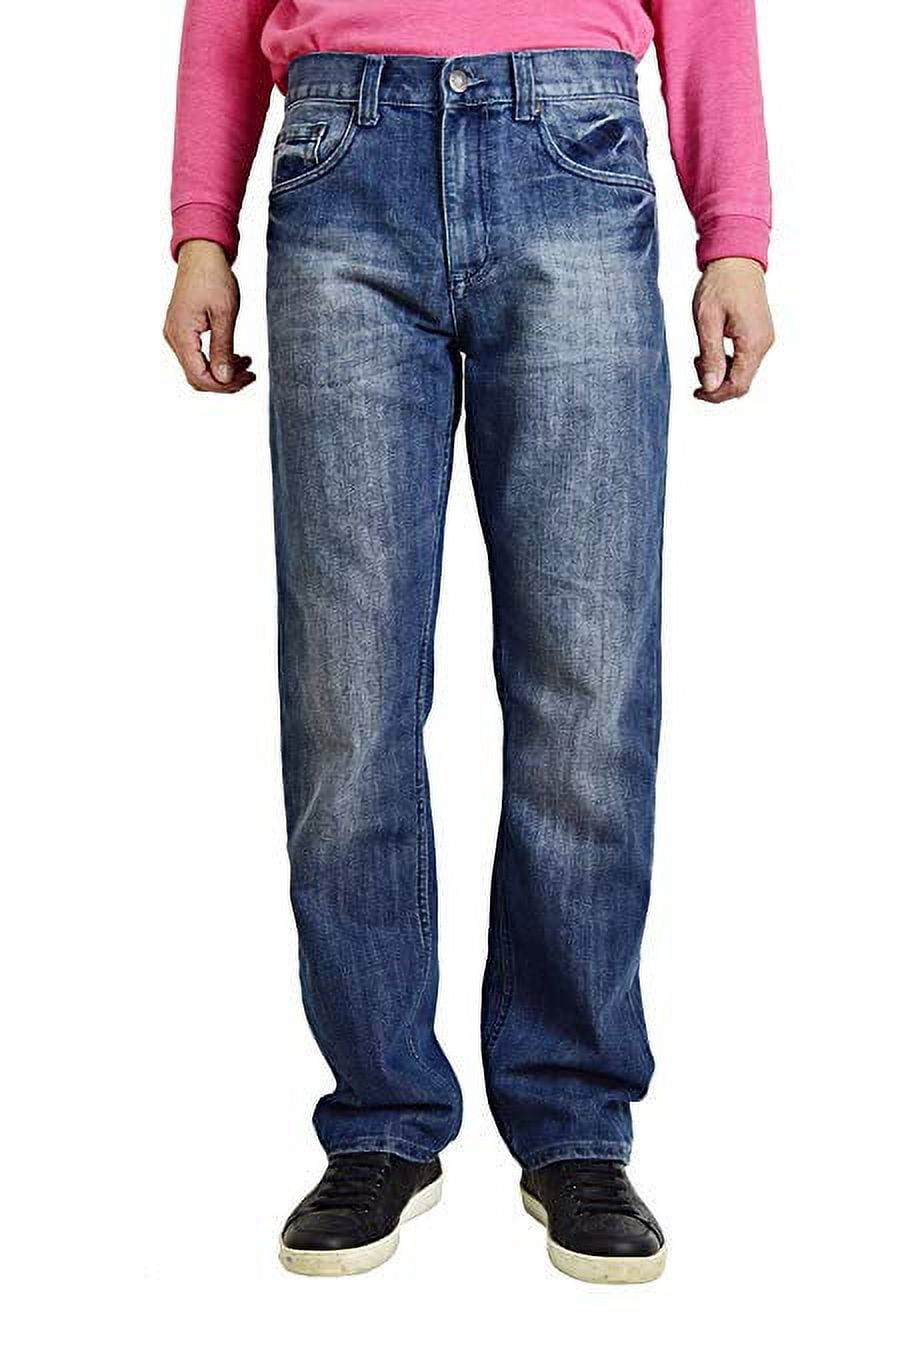 Bailey's Point Men's Fashion Relaxed Straight Jeans Light Vintage Wash ...